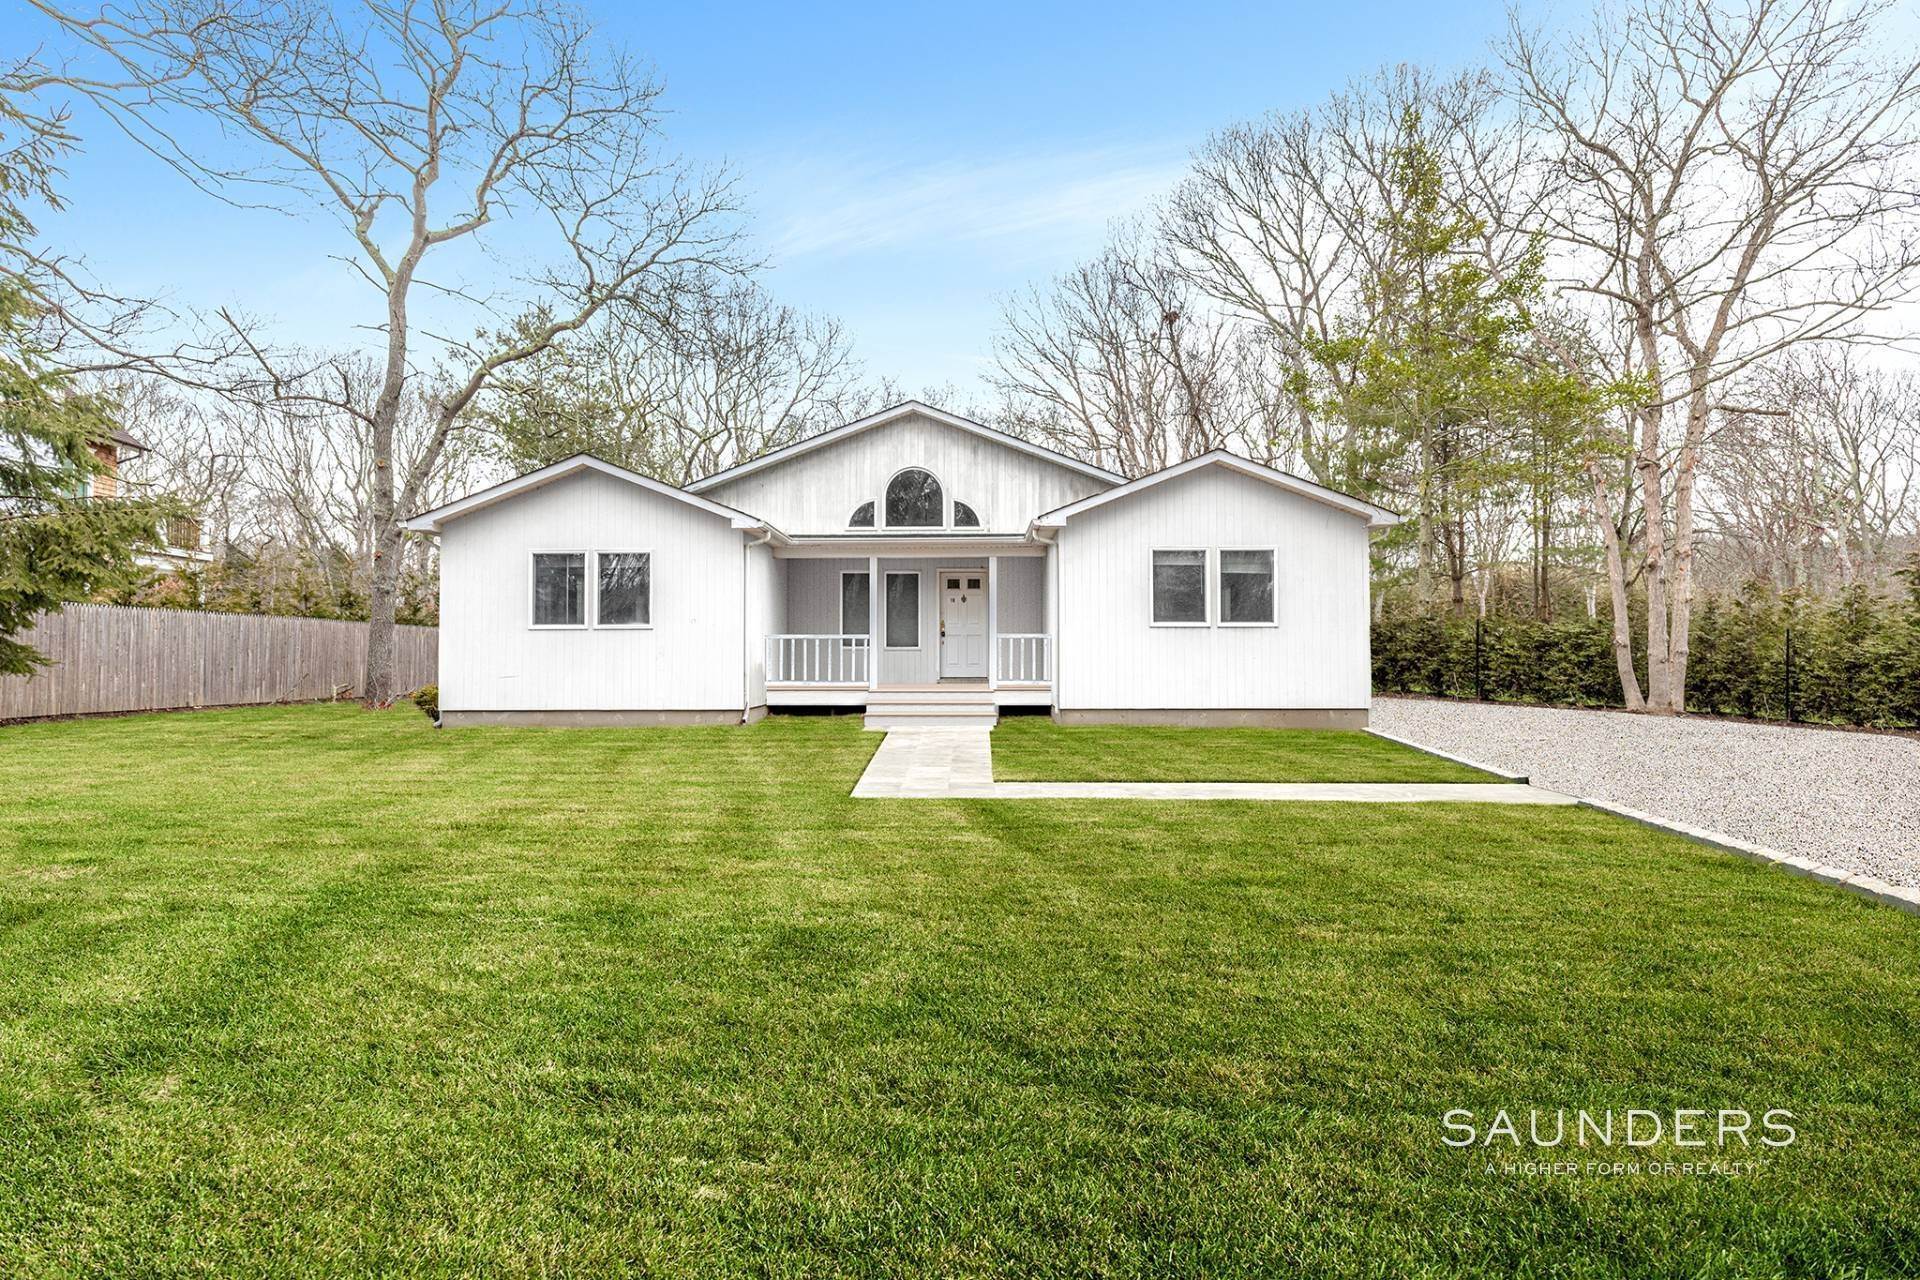 Single Family Homes for Sale at Contemporary Home Close To East Hampton Village 10 Sulky Circle, East Hampton North, East Hampton, NY 11937